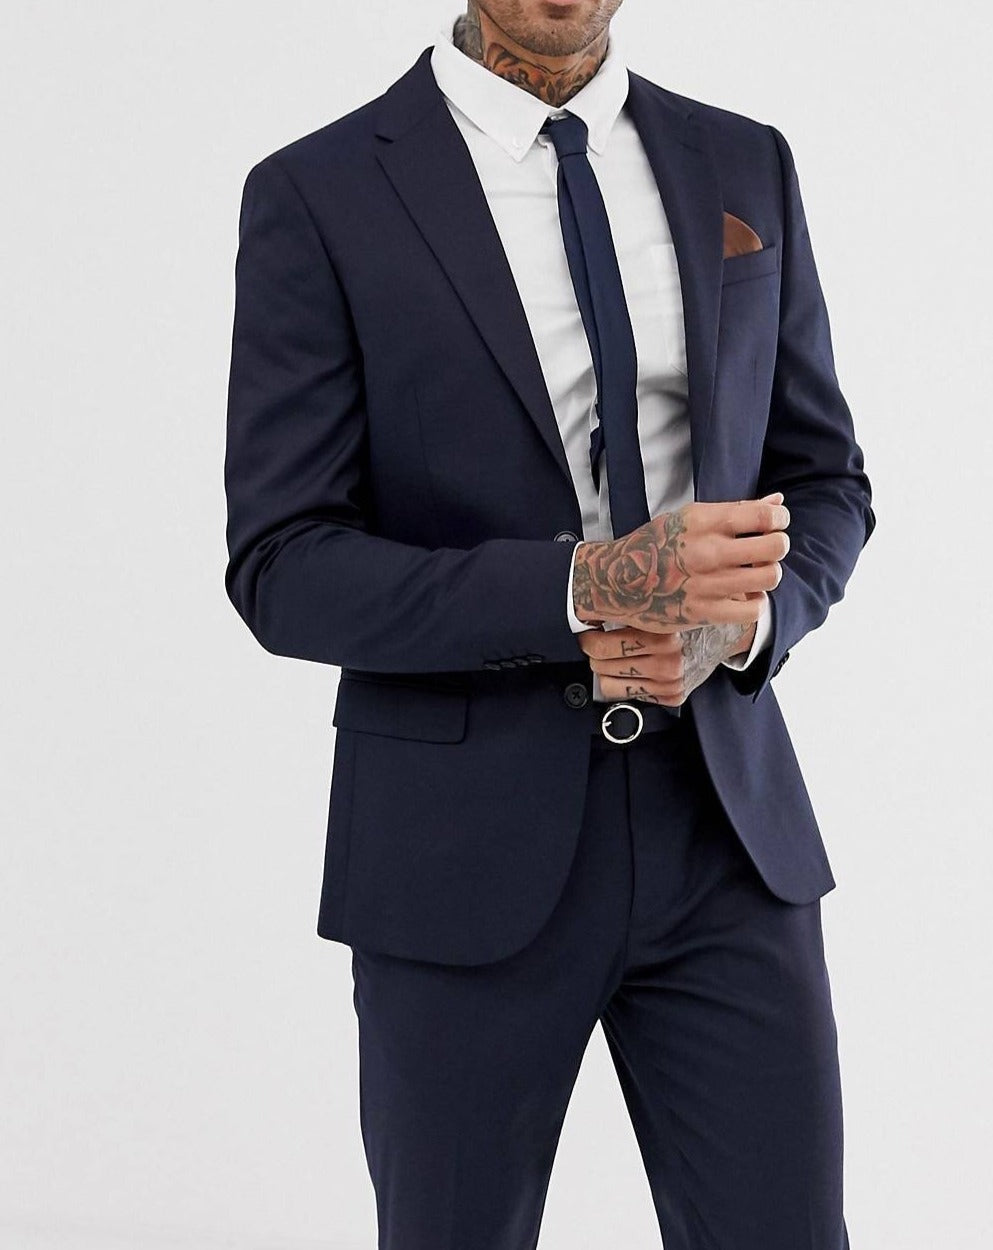 Sports Jacket vs Blazer vs Suit - What's The Difference? - RealMenRealStyle